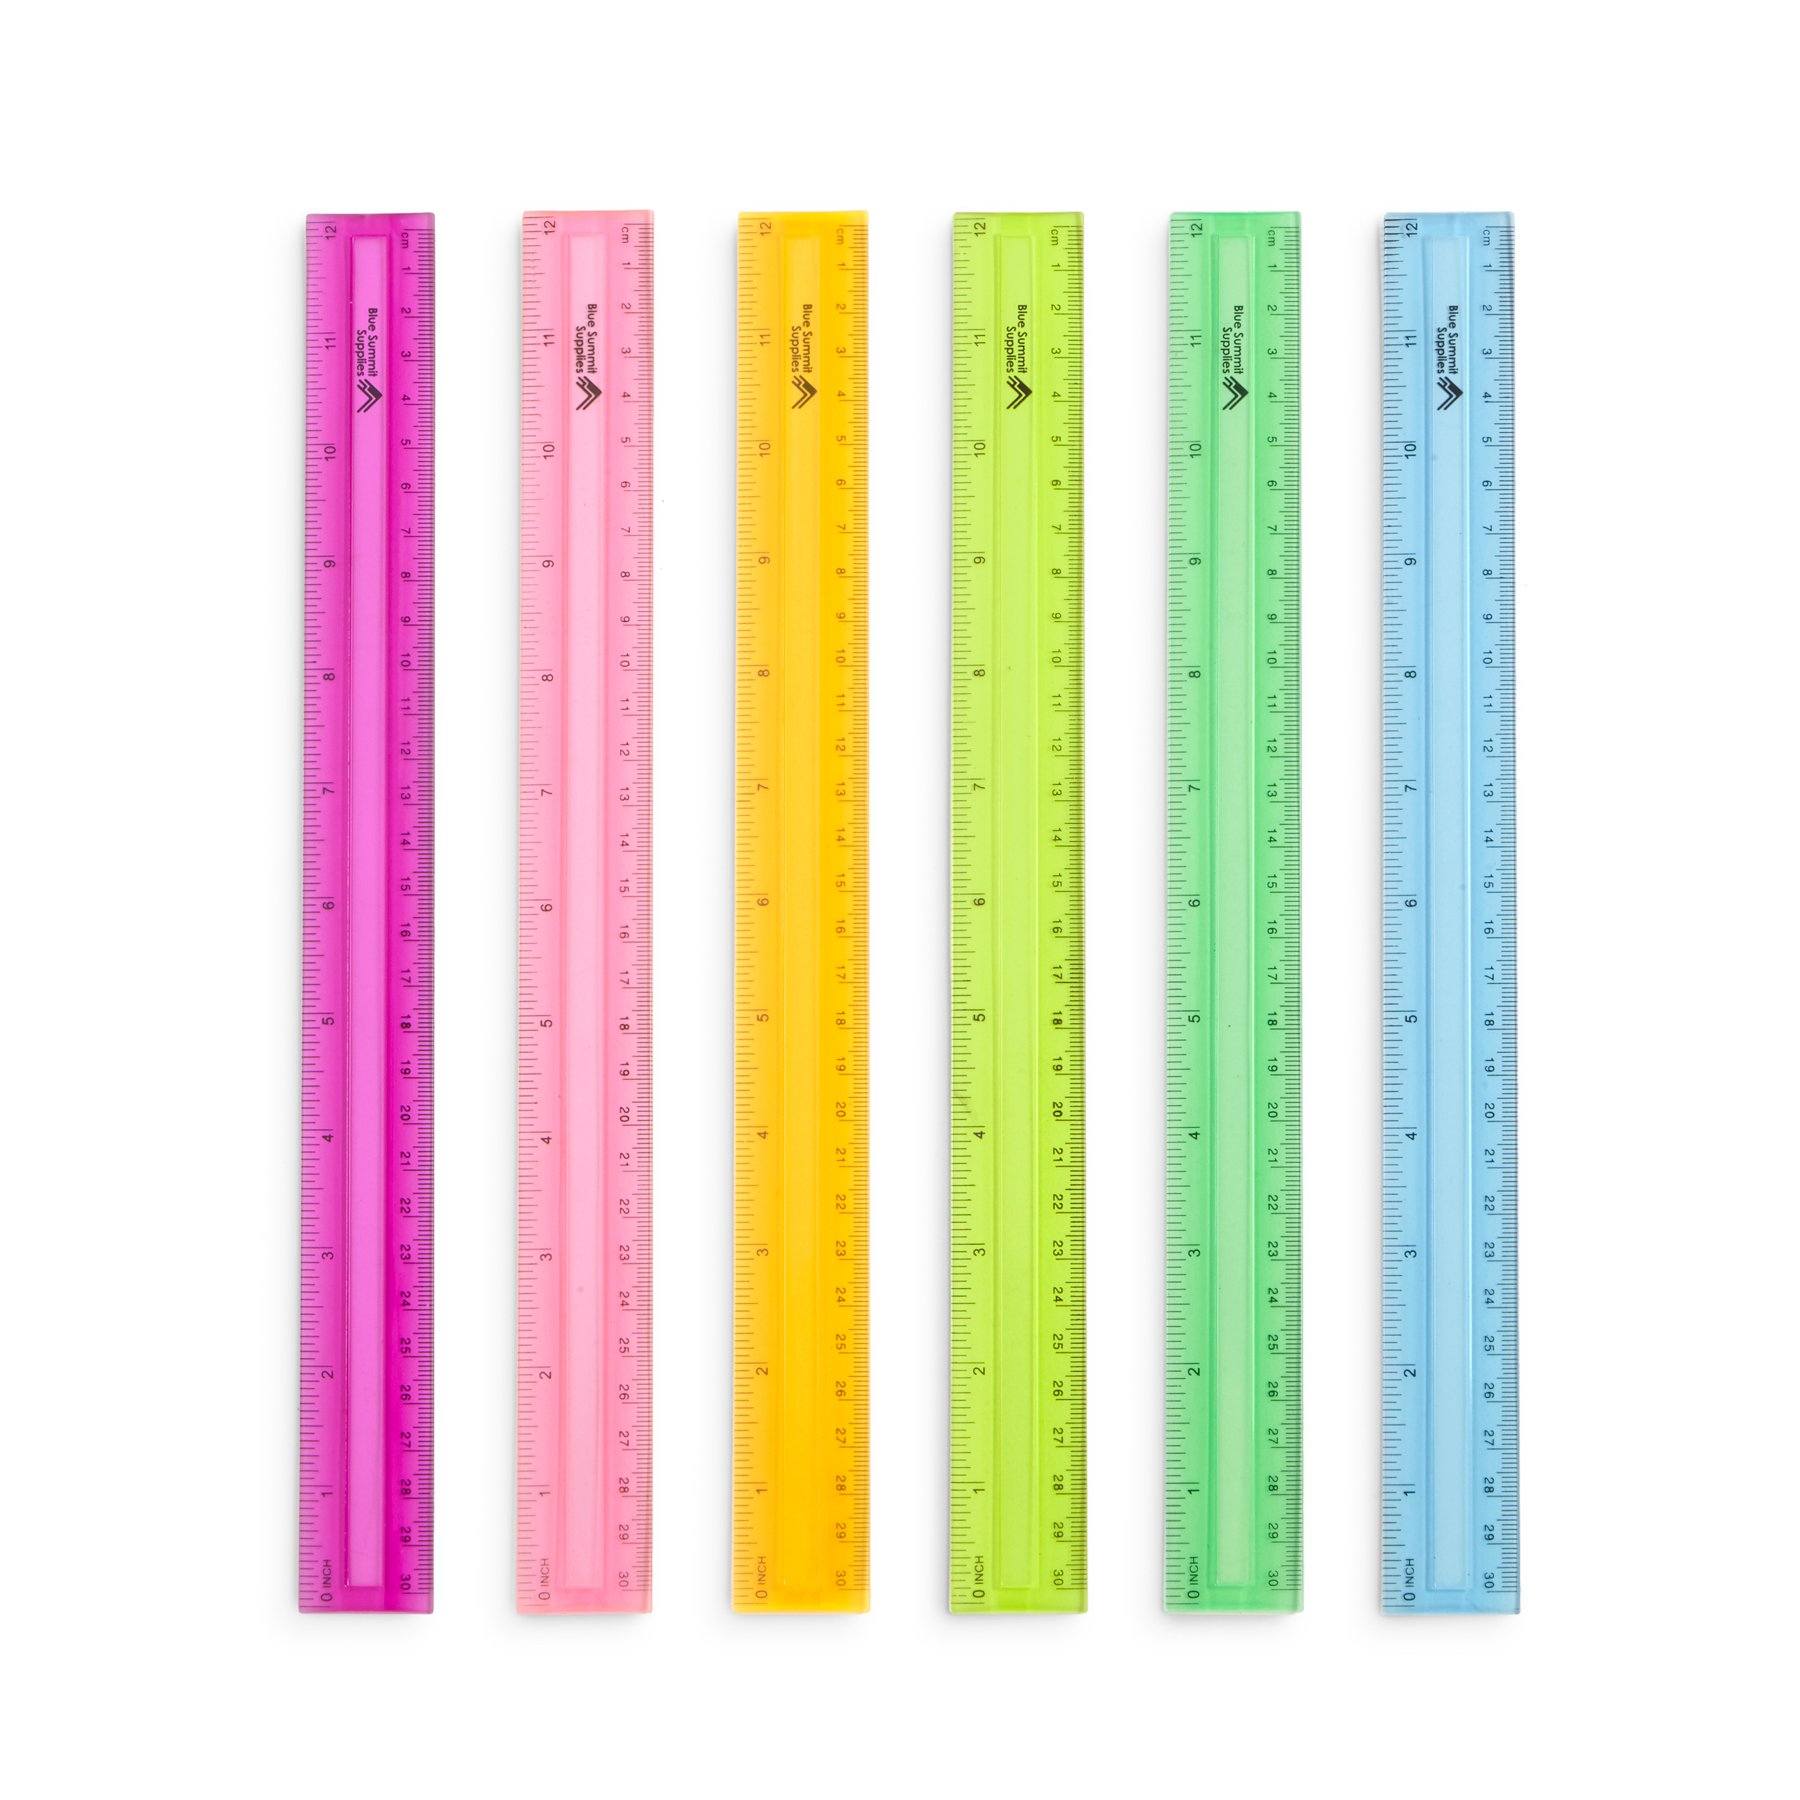 Blue Summit Supplies 30 Plastic Rulers Bulk Shatterproof 12 inch Ruler for School Home or Office Clear Plastic Rulers Assorted Colors 30 Pack